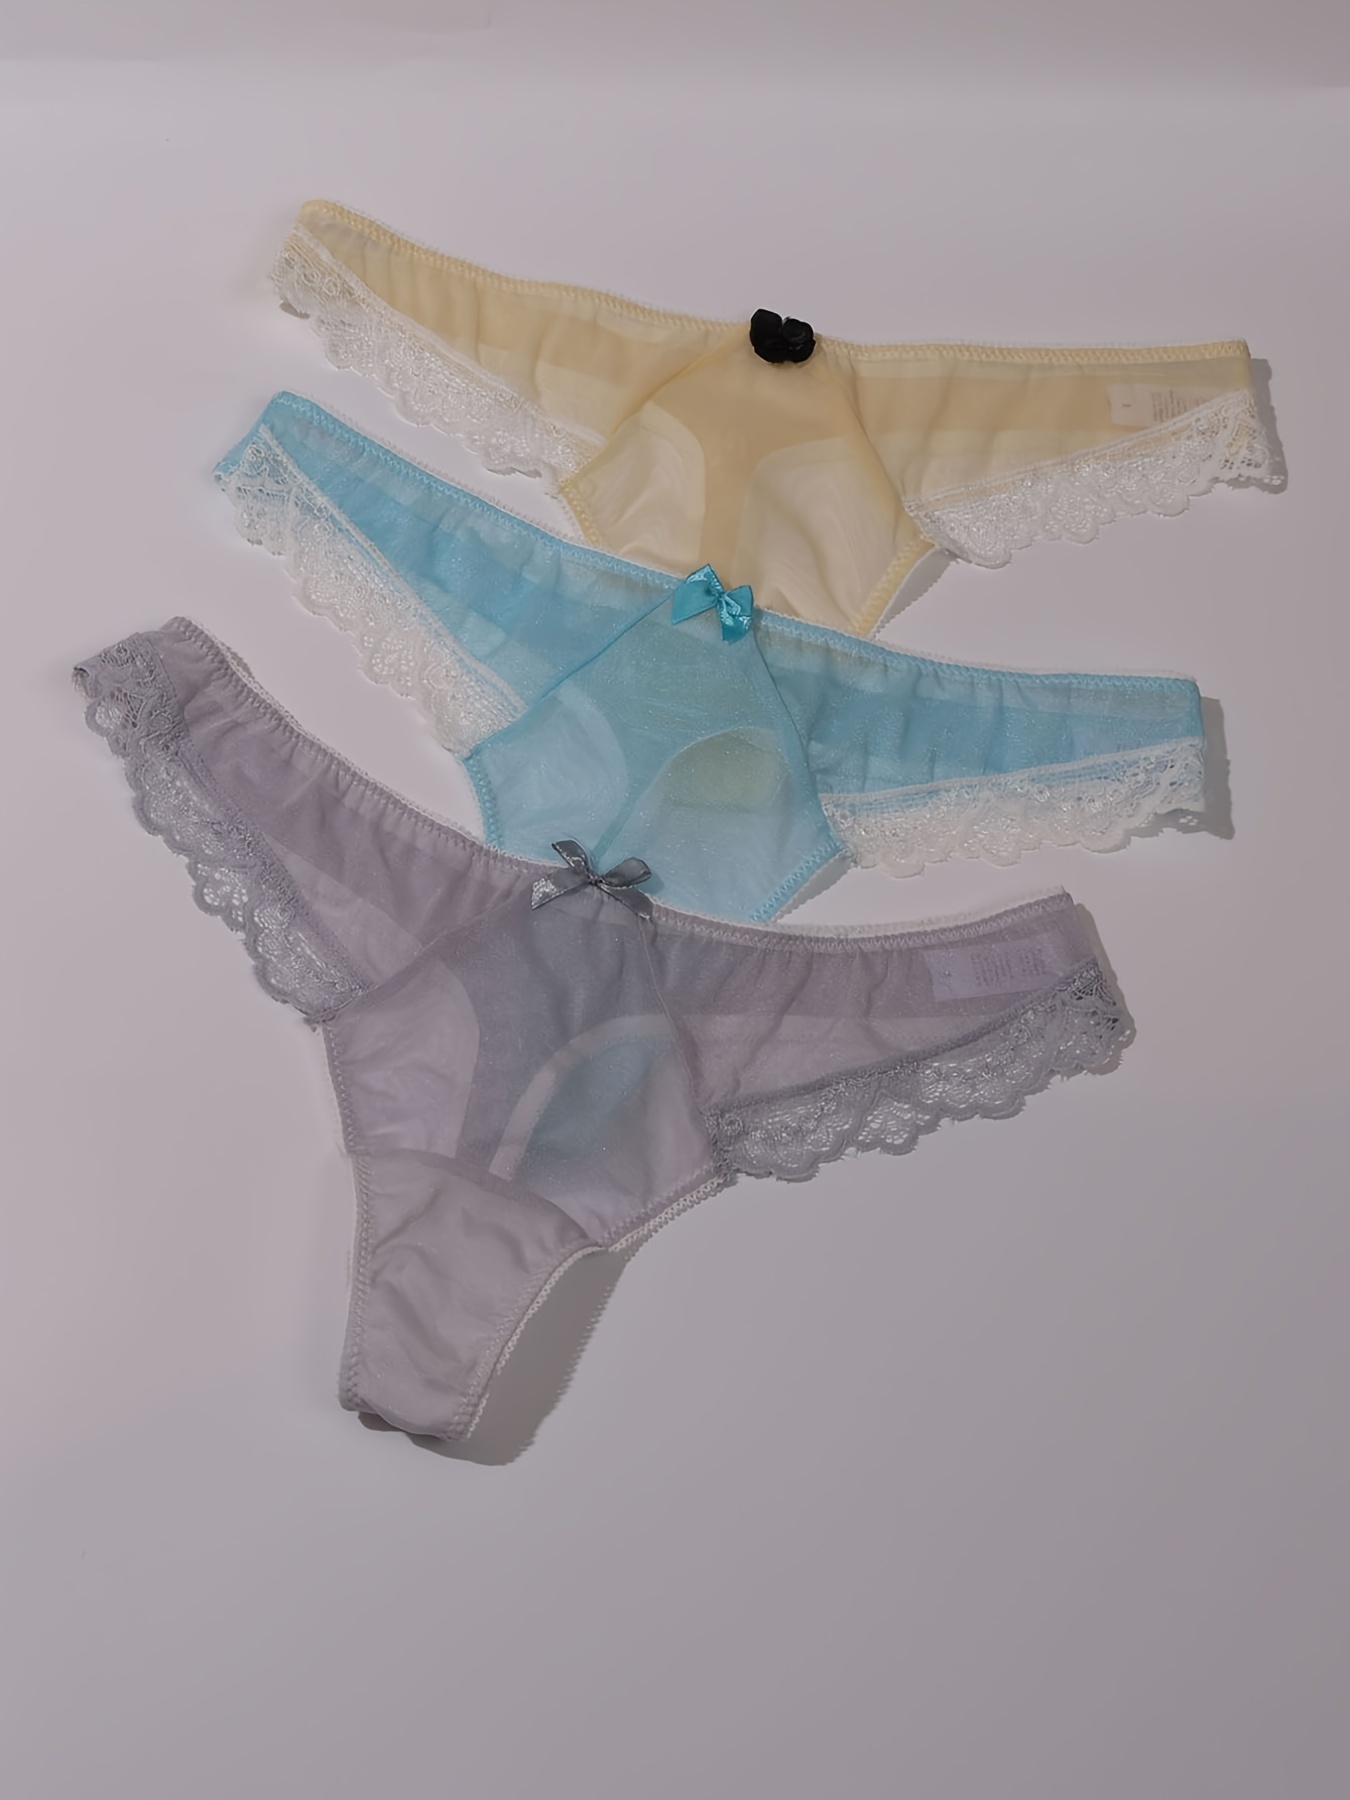 1/6 Female Underwear Thong Panties Mesh with Lace Bow Underpants